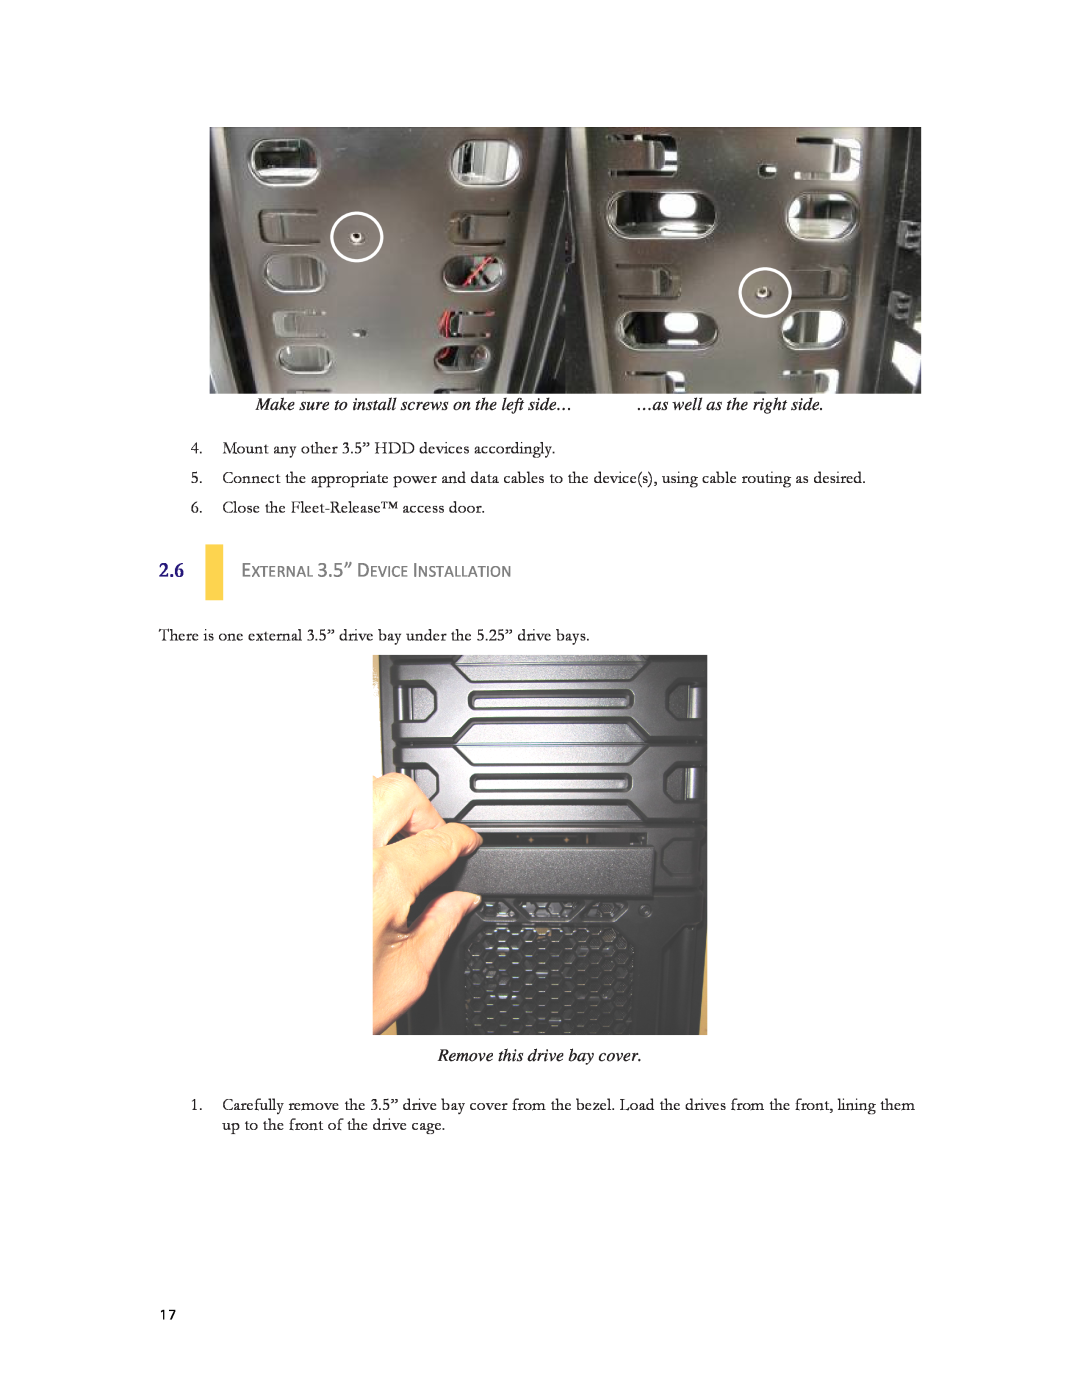 Antec DF-35 user manual Make sure to install screws on the left side…, Mount any other 3.5” HDD devices accordingly 